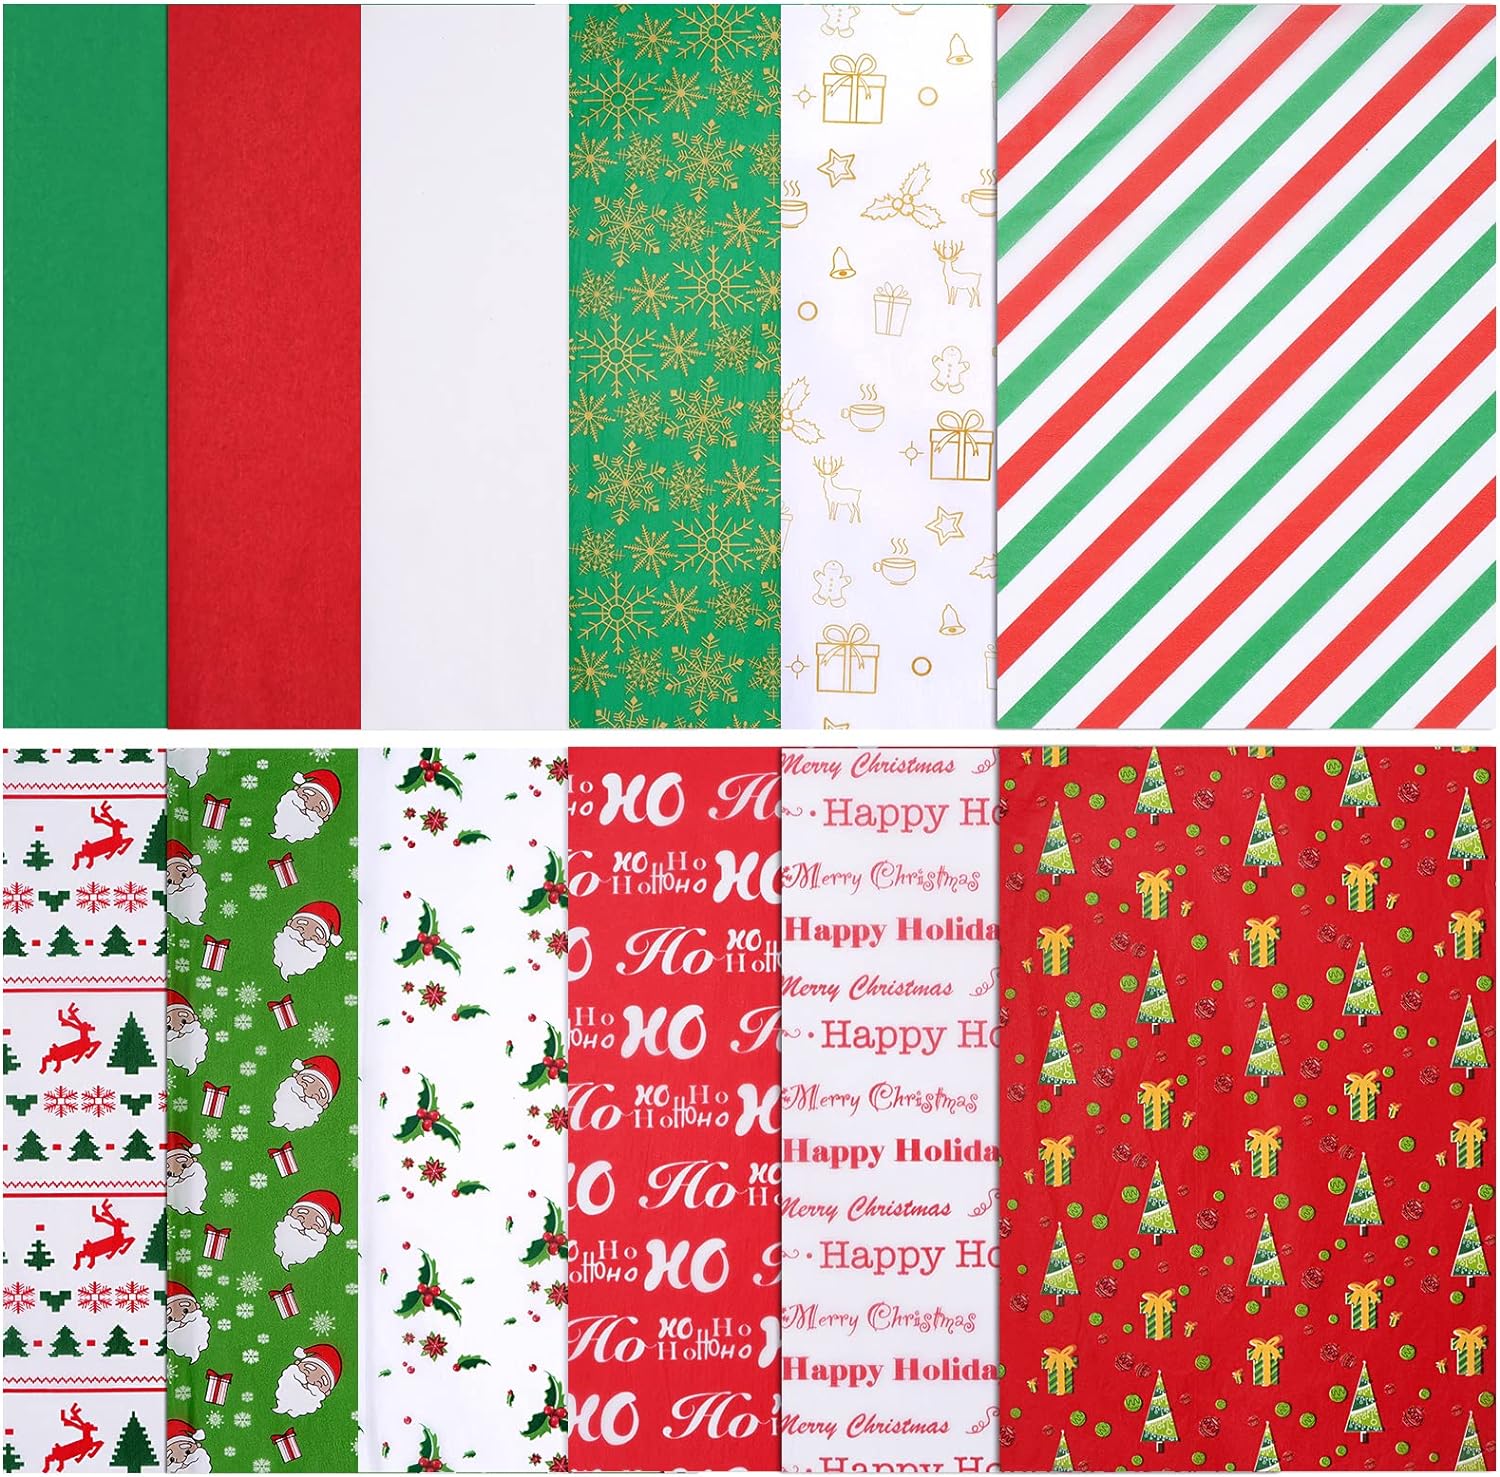 Blisstime Christmas Tissue Paper, 180 Sheets 19.7 x 19.7 Xmas Wrapping Paper in 12 Different Designs Christmas Series Tissue Paper Bulk for Gift Wrapping Wine Bottles DIY Crafts Decor